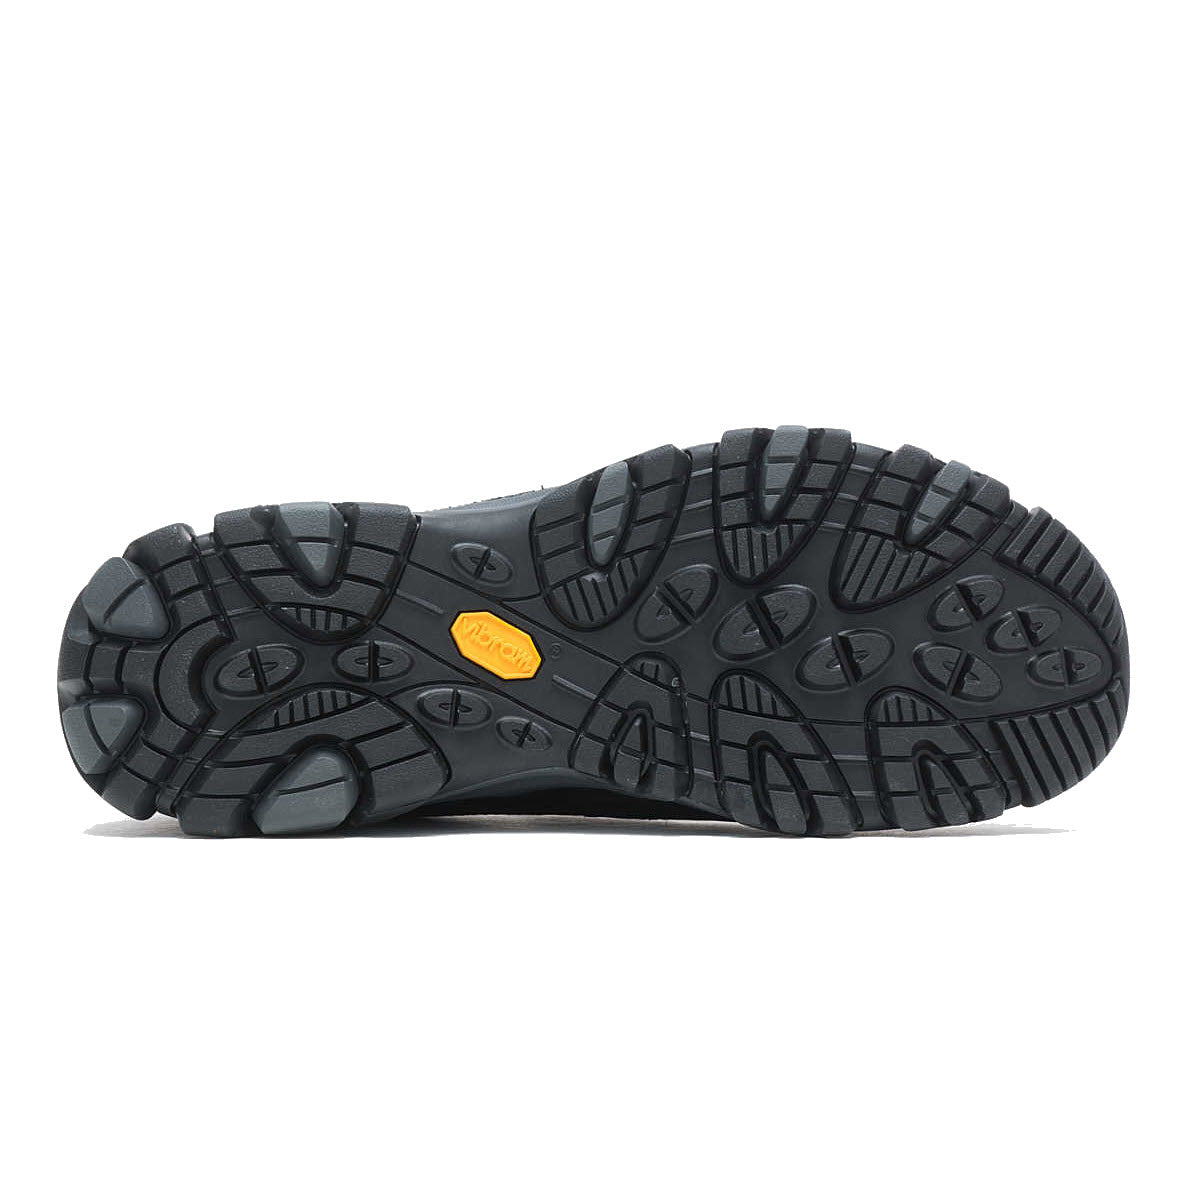 A close-up of the textured black Vibram® TC5+ outsole of a Merrell MOAB ADVENTURE 3 MOC BLACK LEATHER - MENS shoe, featuring circular and geometric tread patterns and a small orange logo.